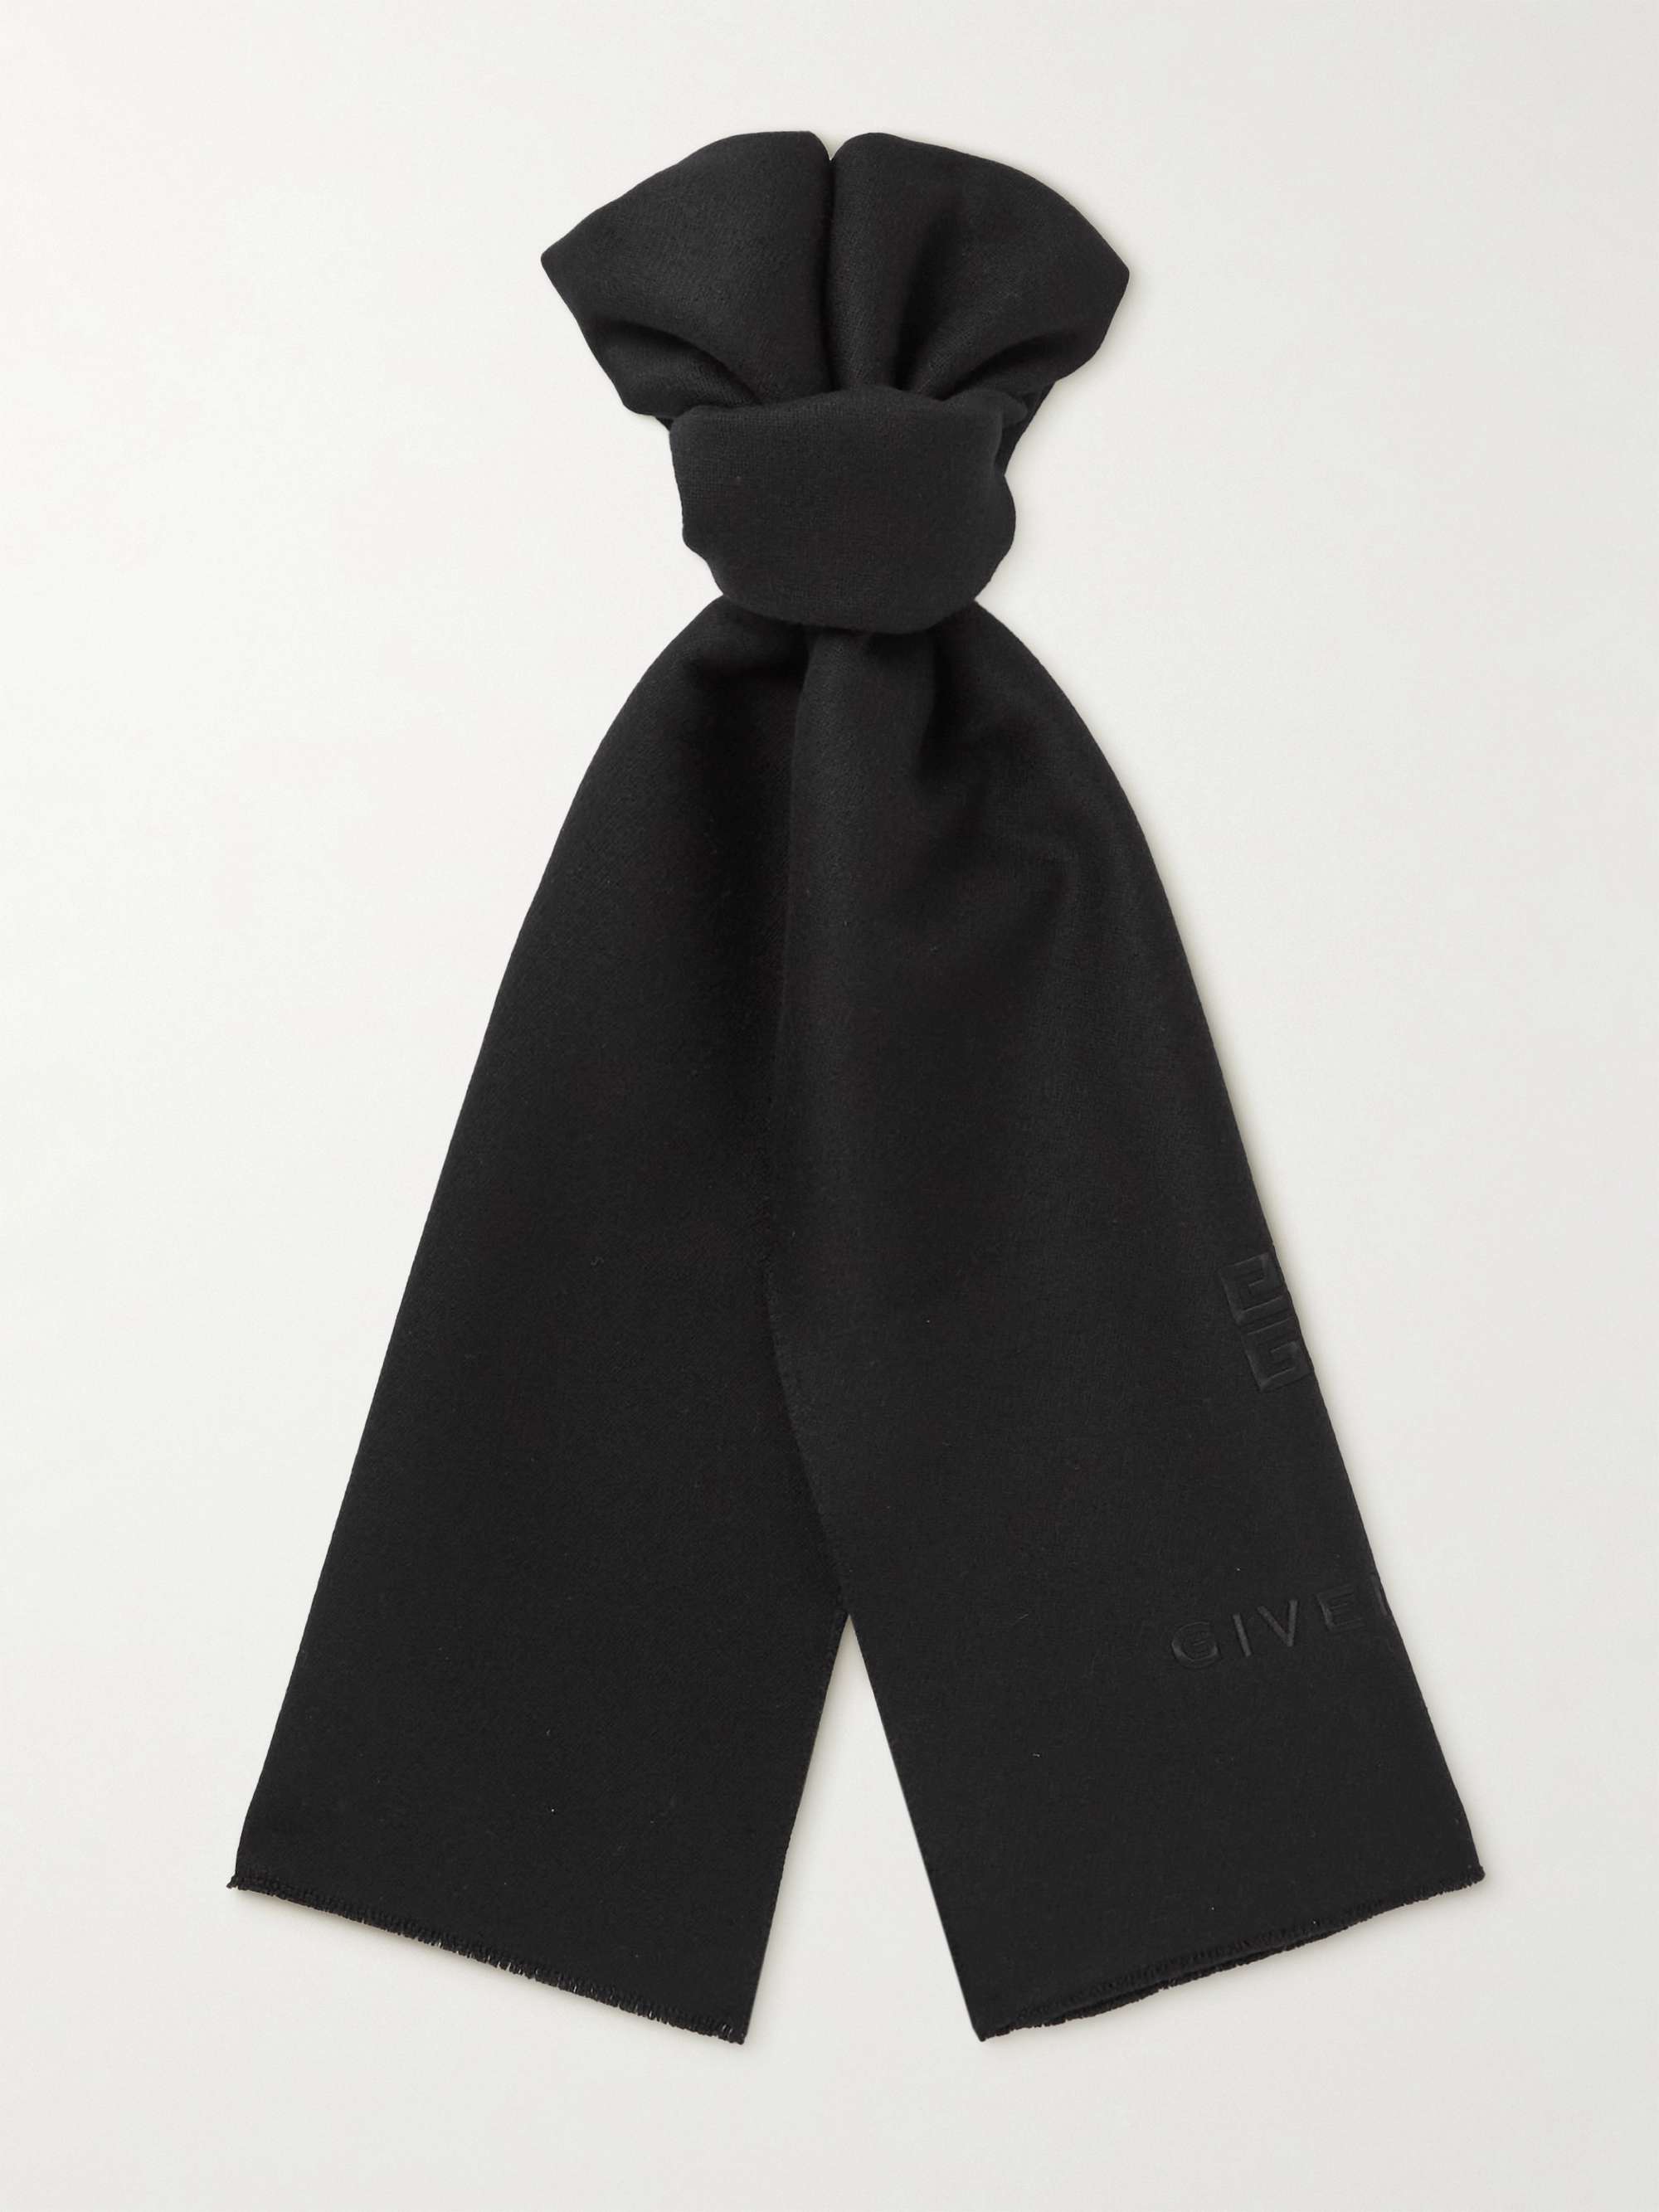 GIVENCHY Logo-Embroidered Wool and Cashmere-Blend Scarf